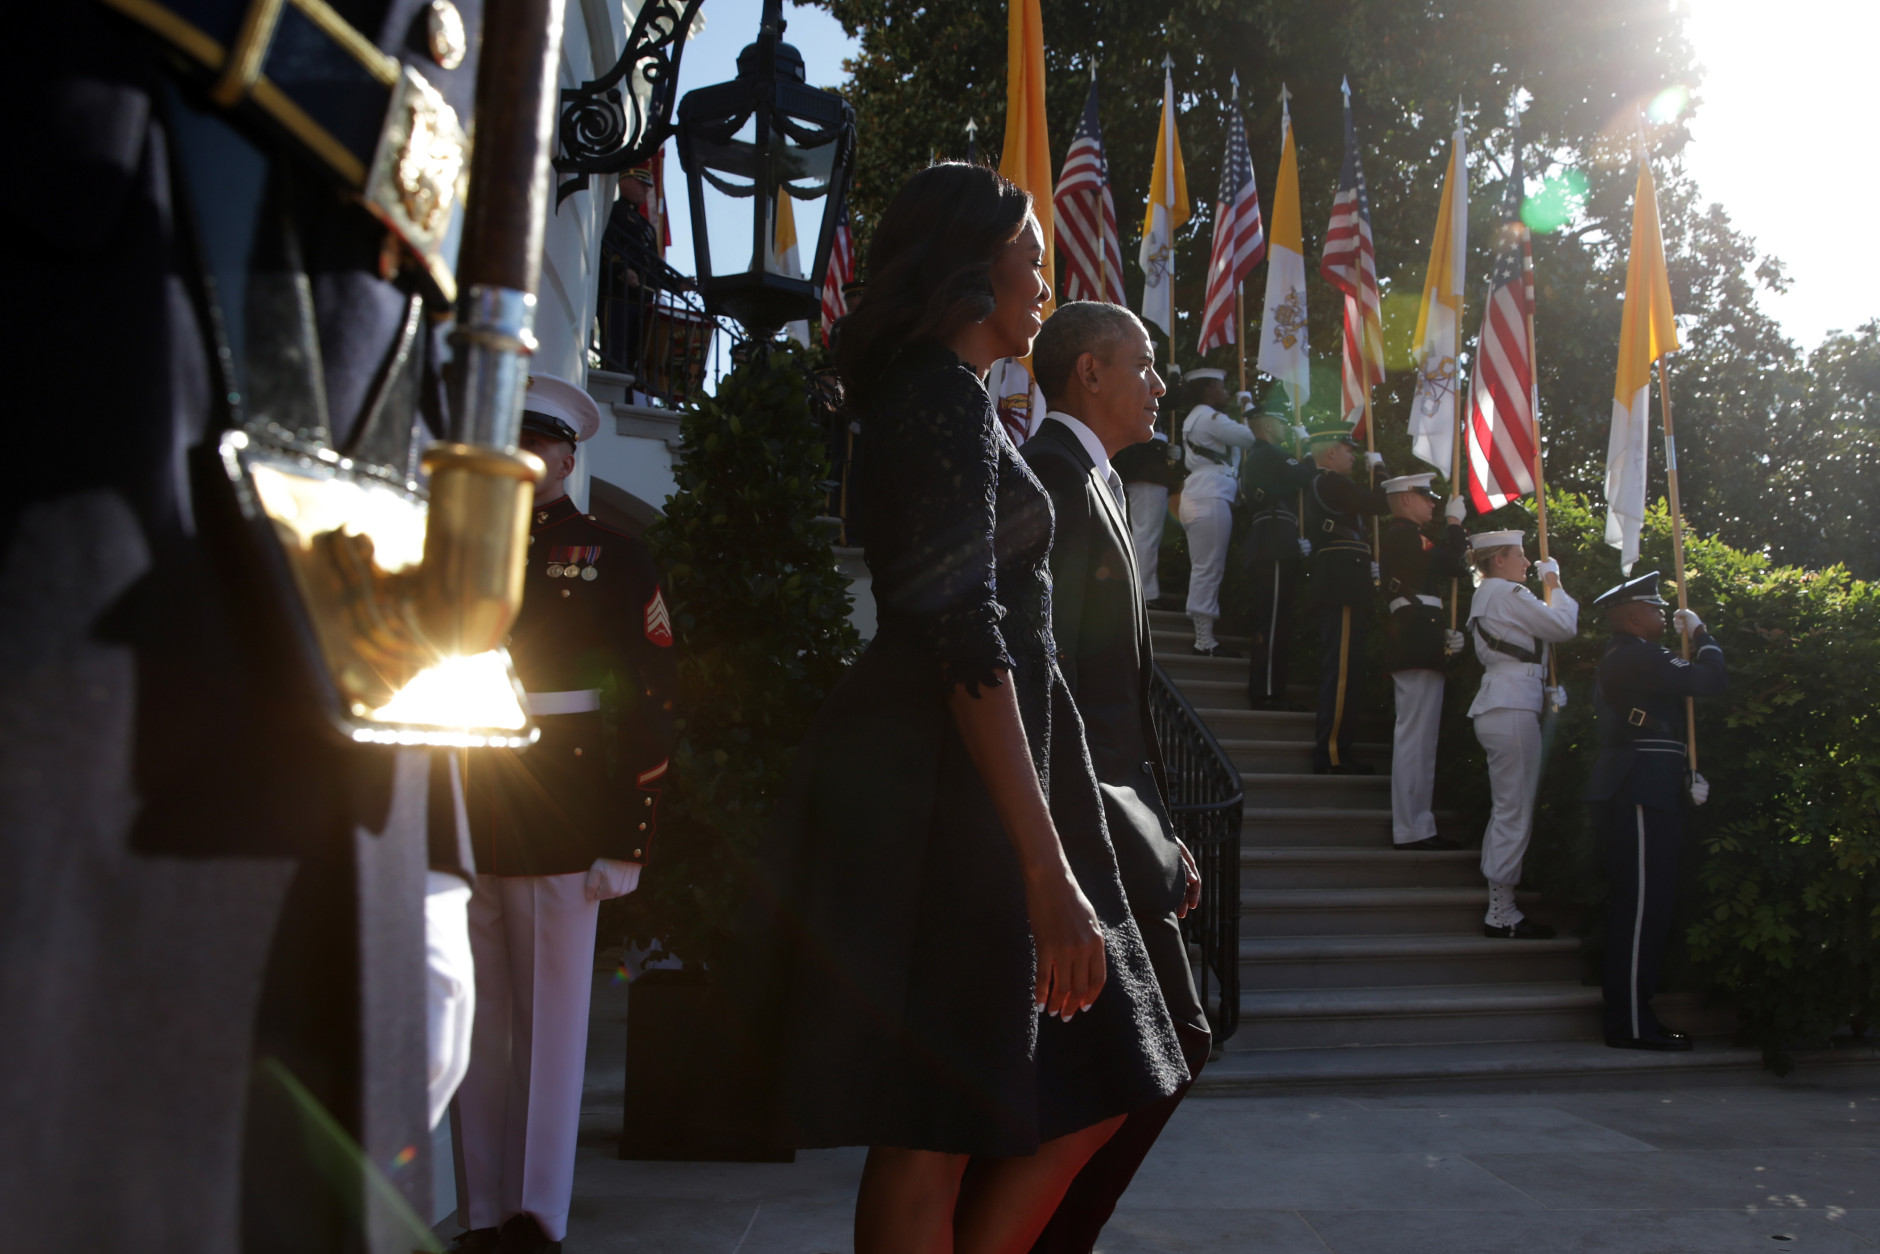 WASHINGTON, DC - SEPTEMBER 23:  U.S. President Barack Obama and first Lady Michelle Obama walk out to welcome Pope Francis prior to his arrival ceremony at the White House on September 23, 2015 in Washington, DC. The Pope begins his first trip to the United States at the White House followed by a visit to St. Matthew's Cathedral, and will then hold a Mass on the grounds of the Basilica of the National Shrine of the Immaculate Conception.  (Photo by Alex Wong/Getty Images)